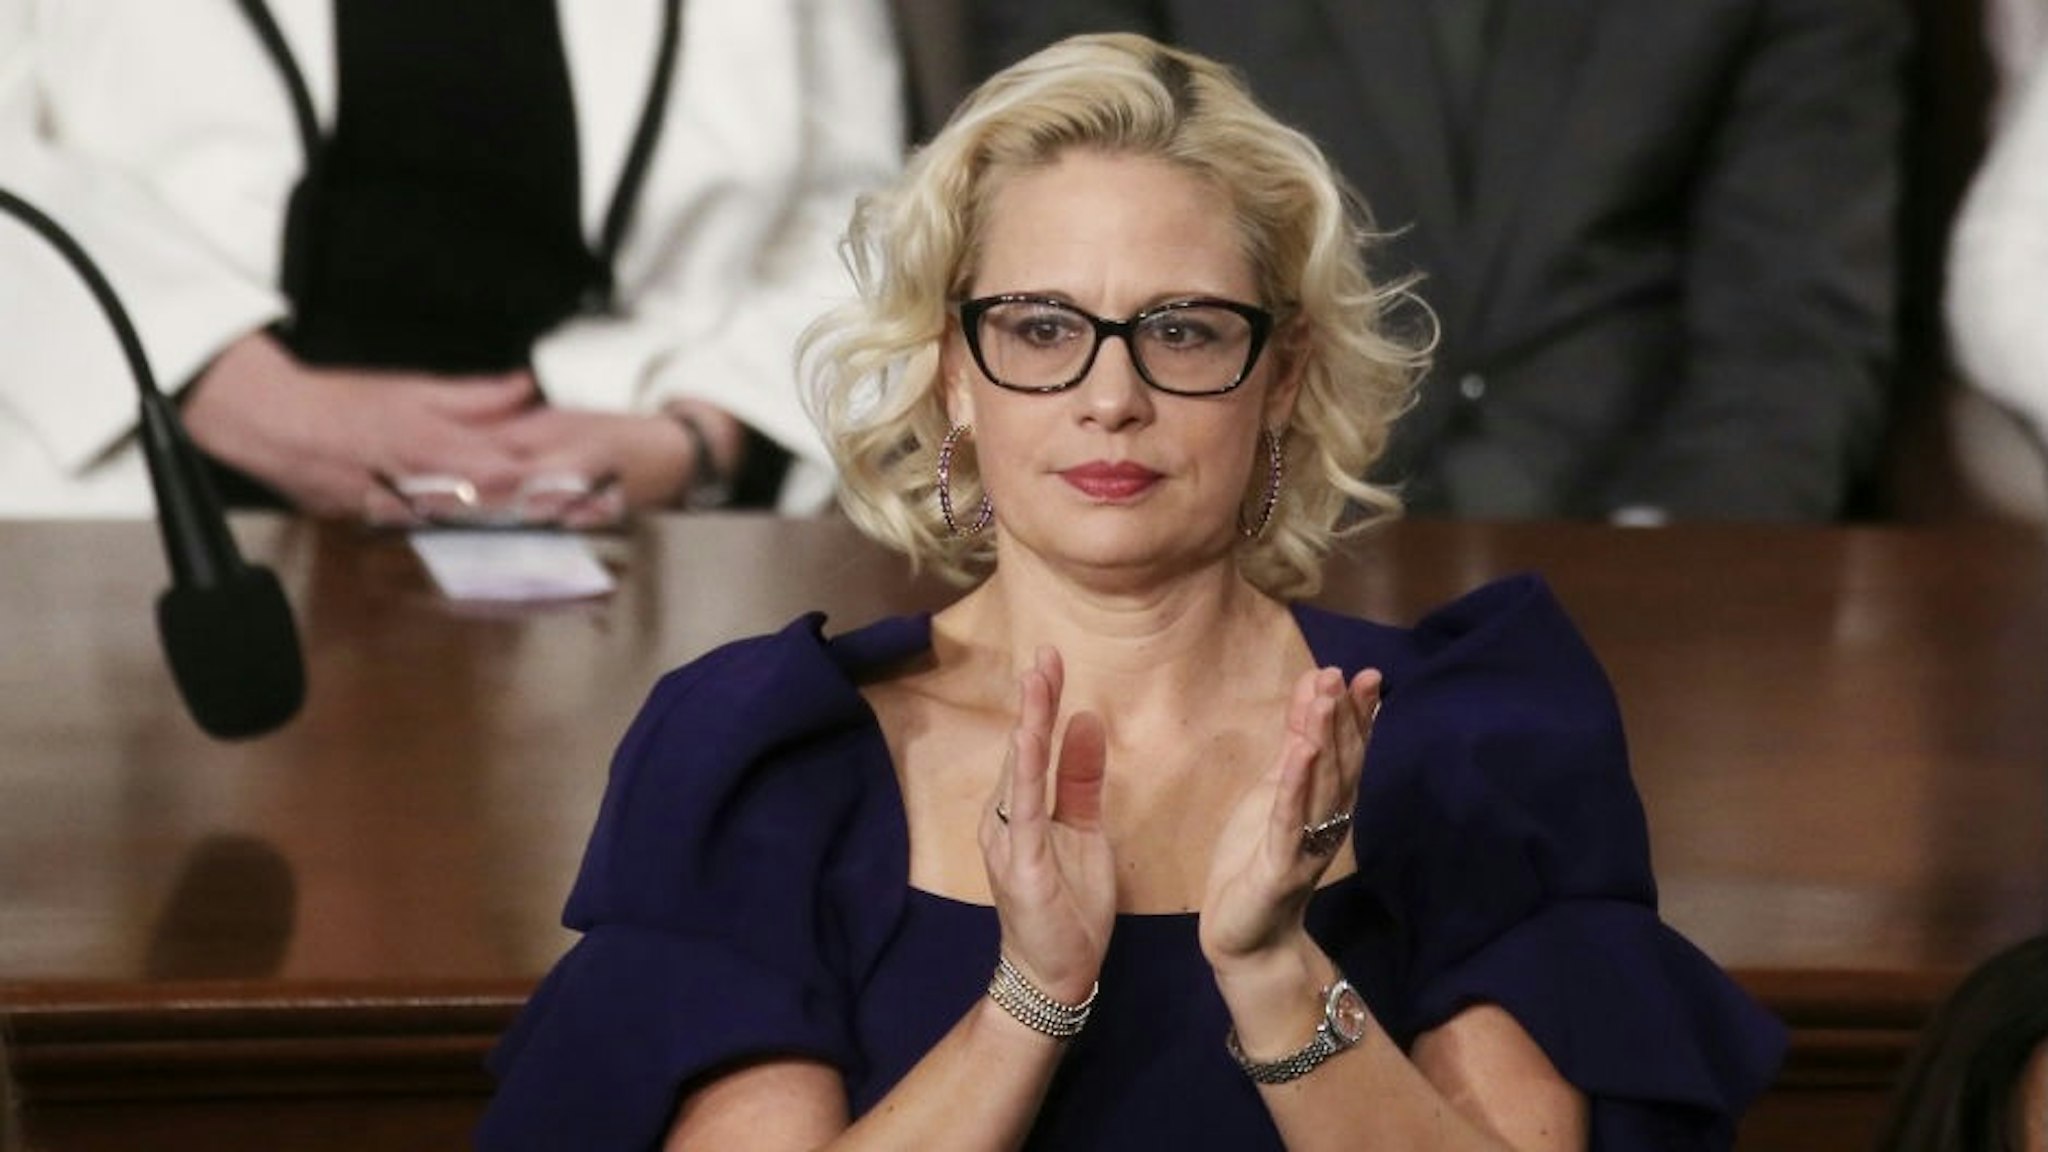 President Trump Gives State Of The Union Address WASHINGTON, DC - FEBRUARY 04: Sen. Krysten Sinema (D-AZ) applauds during the State of the Union address in the chamber of the U.S. House of Representatives on February 04, 2020 in Washington, DC. President Trump delivers his third State of the Union to the nation the night before the U.S. Senate is set to vote in his impeachment trial. (Photo by Mario Tama/Getty Images) Mario Tama / Staff via Getty Images